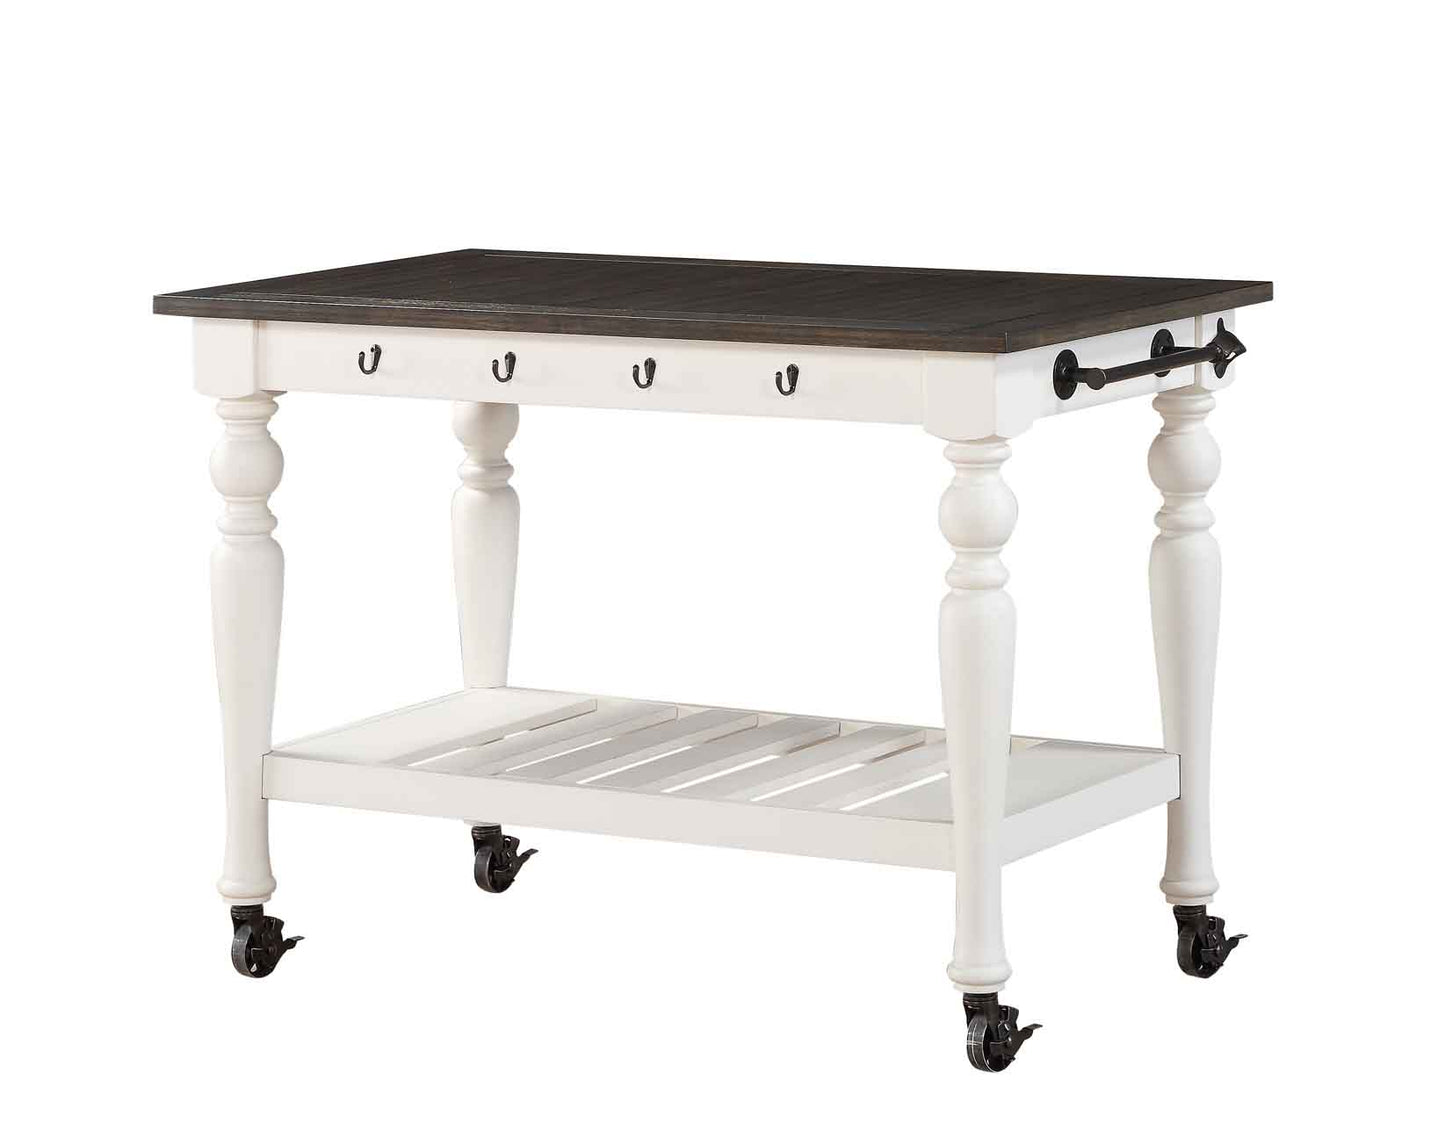 Joanna Two-Tone Drop-Leaf Counter Height Table by Steve Silver